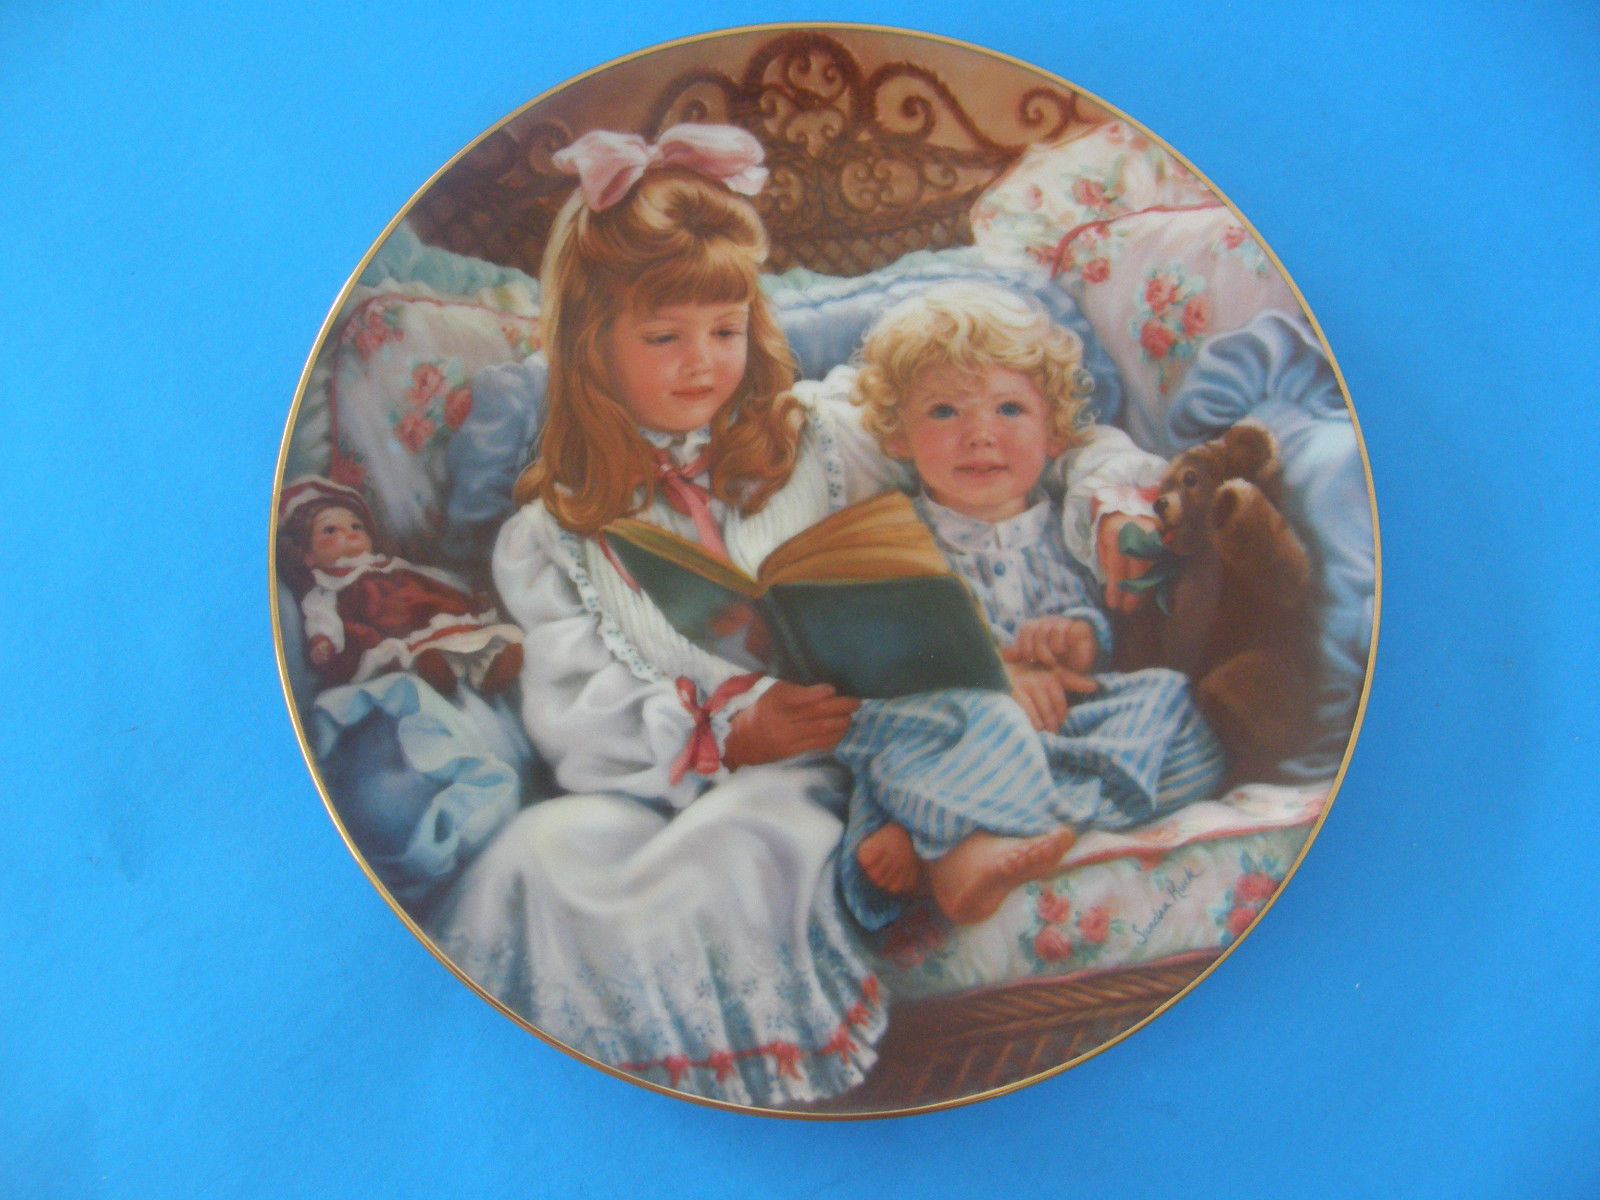 Primary image for "NIGHT-TIME STORY" THE BAREFOOT CHILDREN PLATE COLLECTIO BY SANDRA KUCK #1157 NT